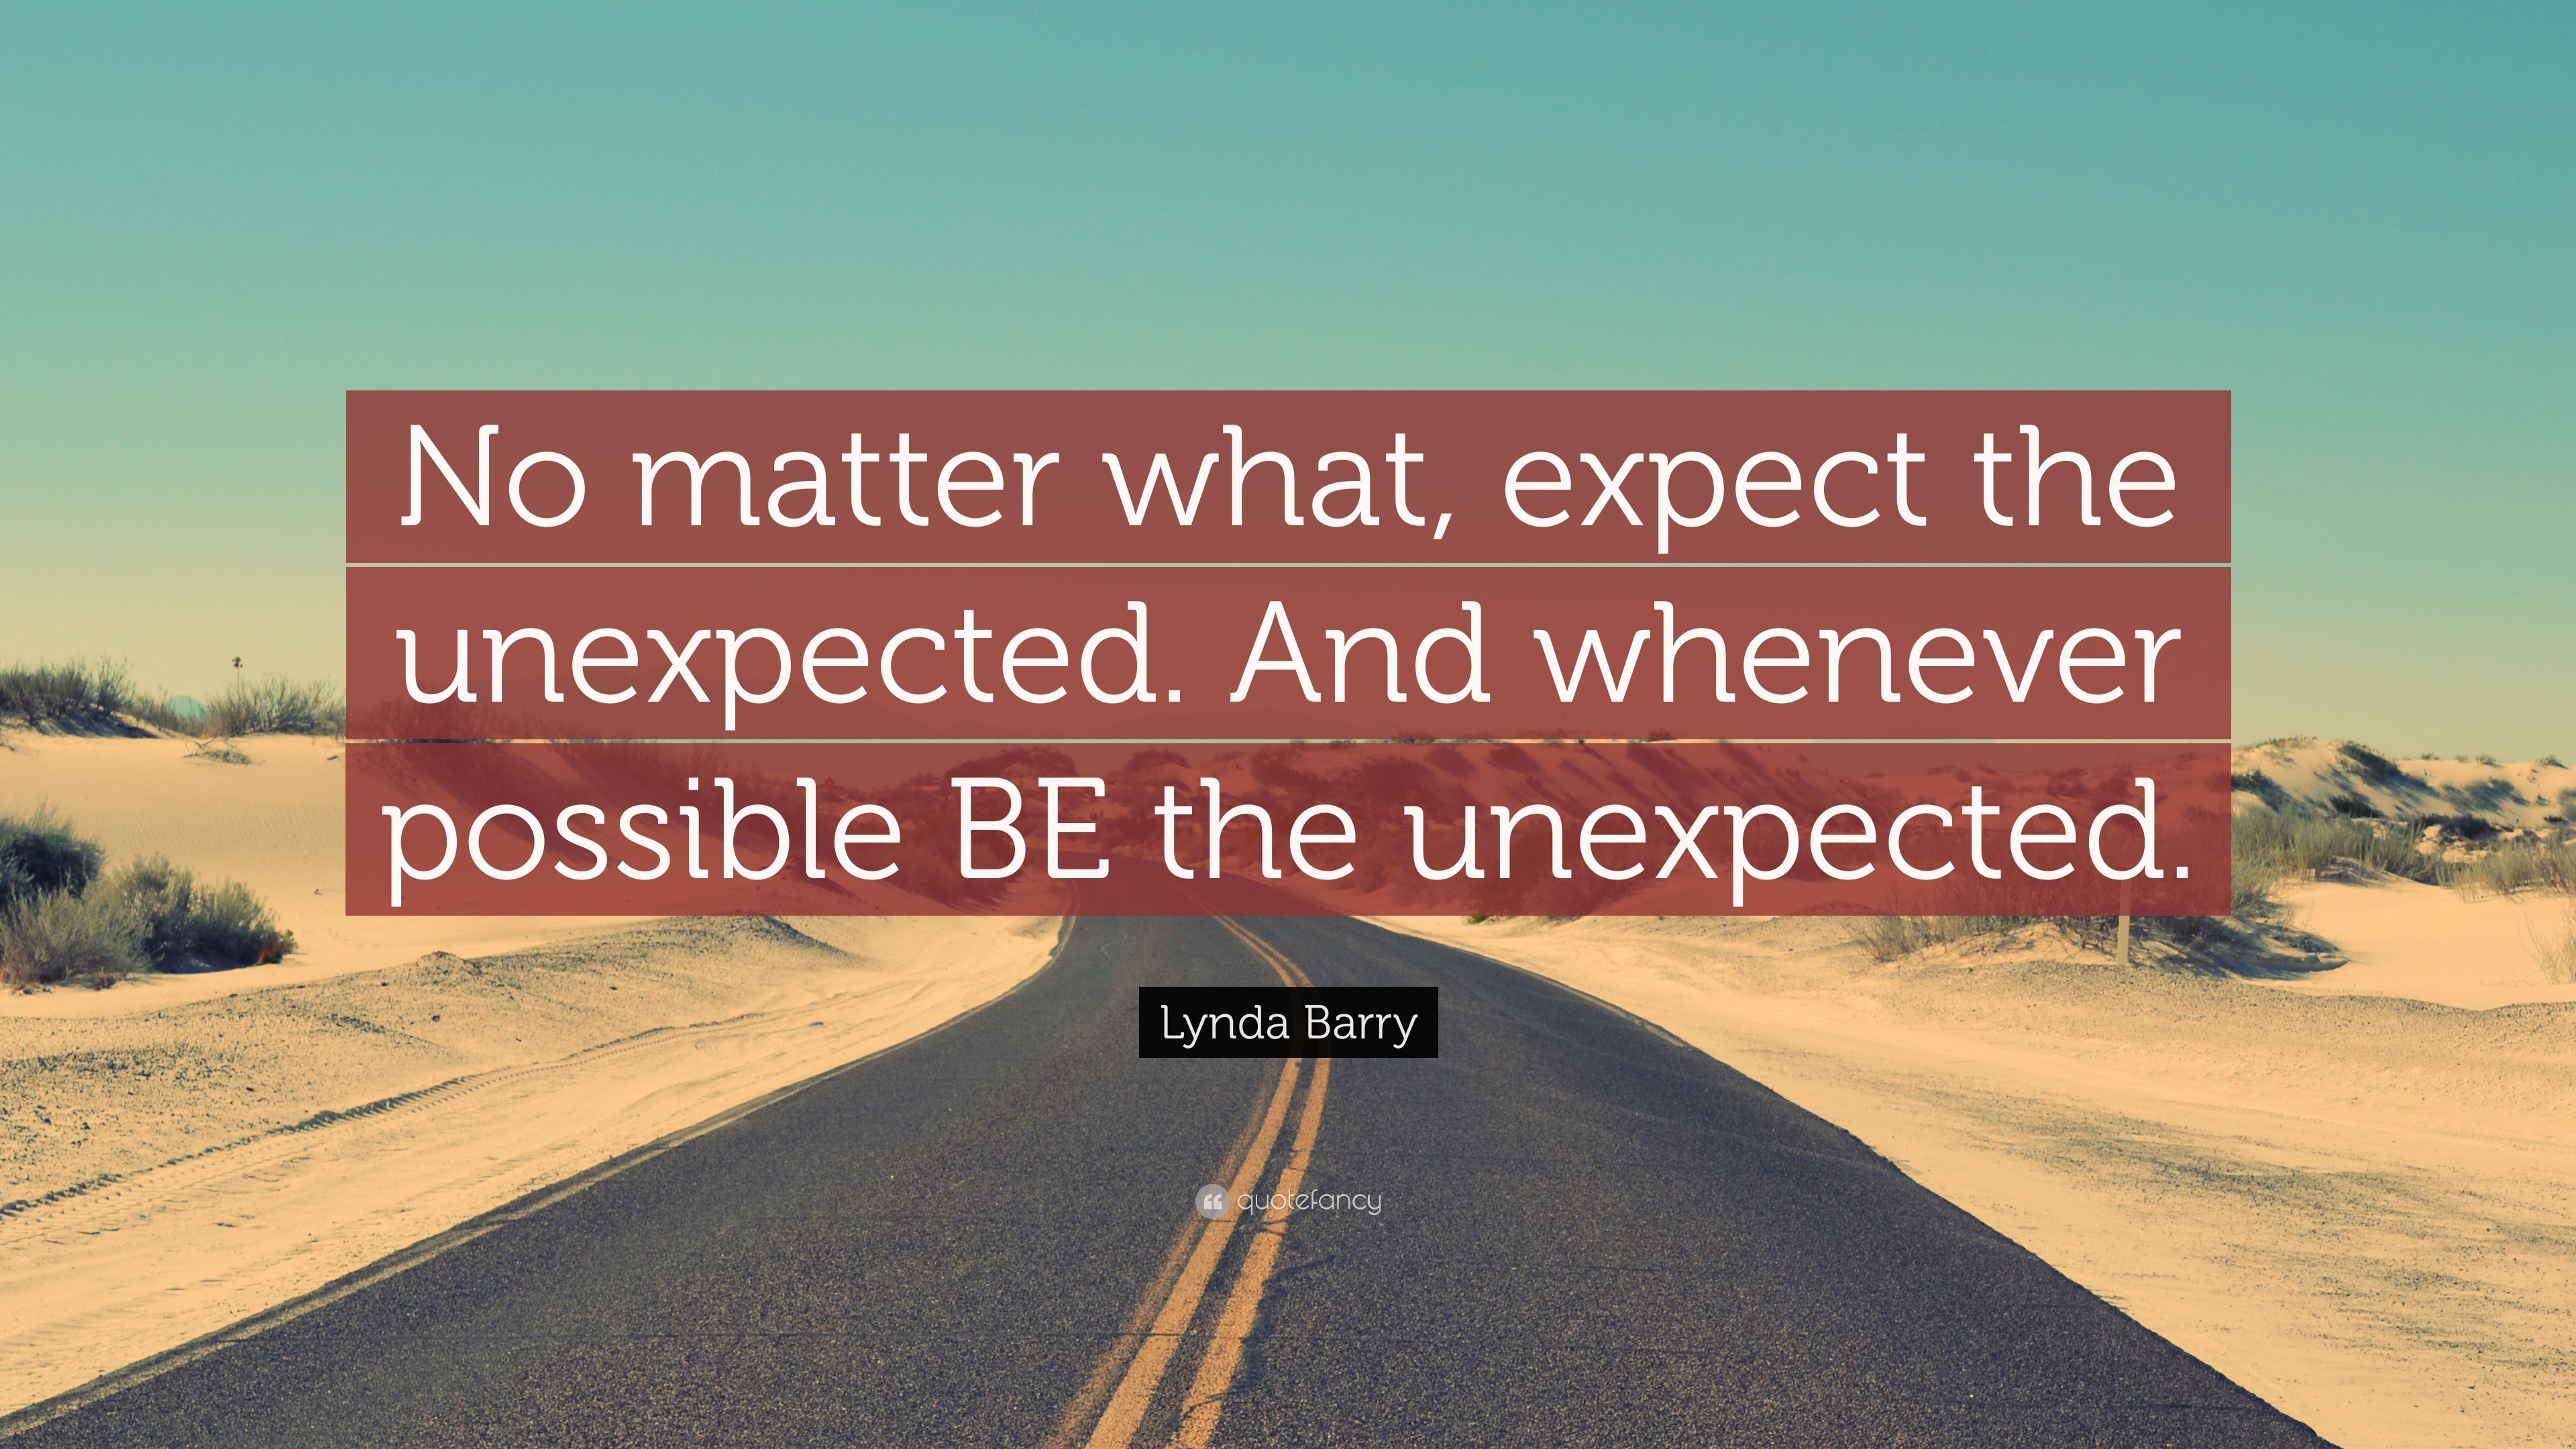 Lynda Barry Quote: “No matter what, expect the unexpected. And whenever